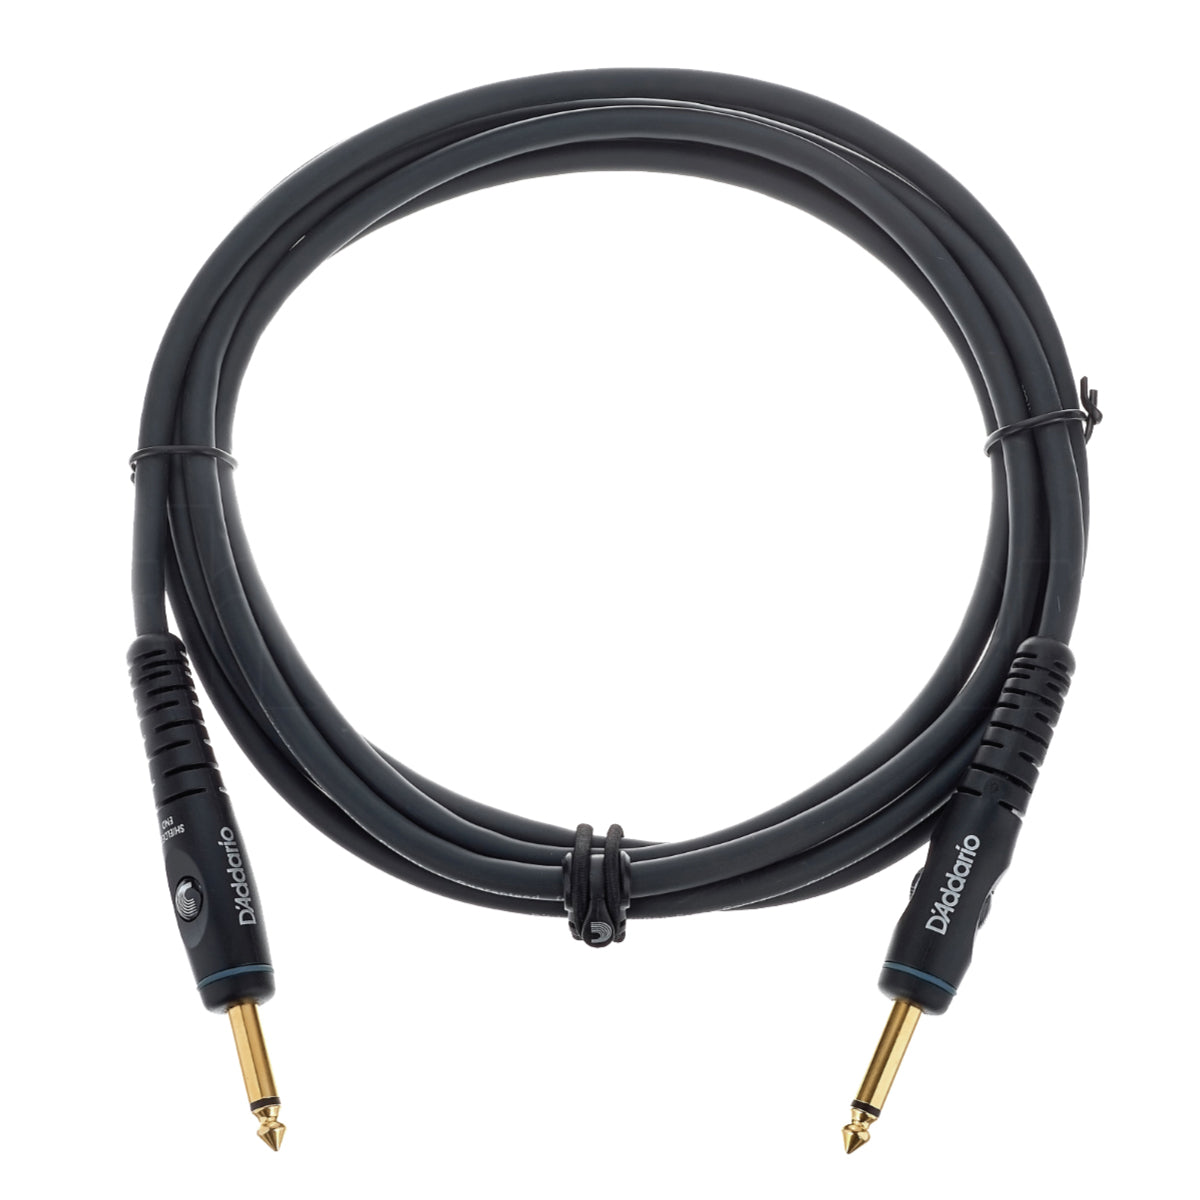 D'ADDARIO Planet Wave PW-G- (Custom Series Instrument Cable 5, 10, 15, 20 & 30 feet)